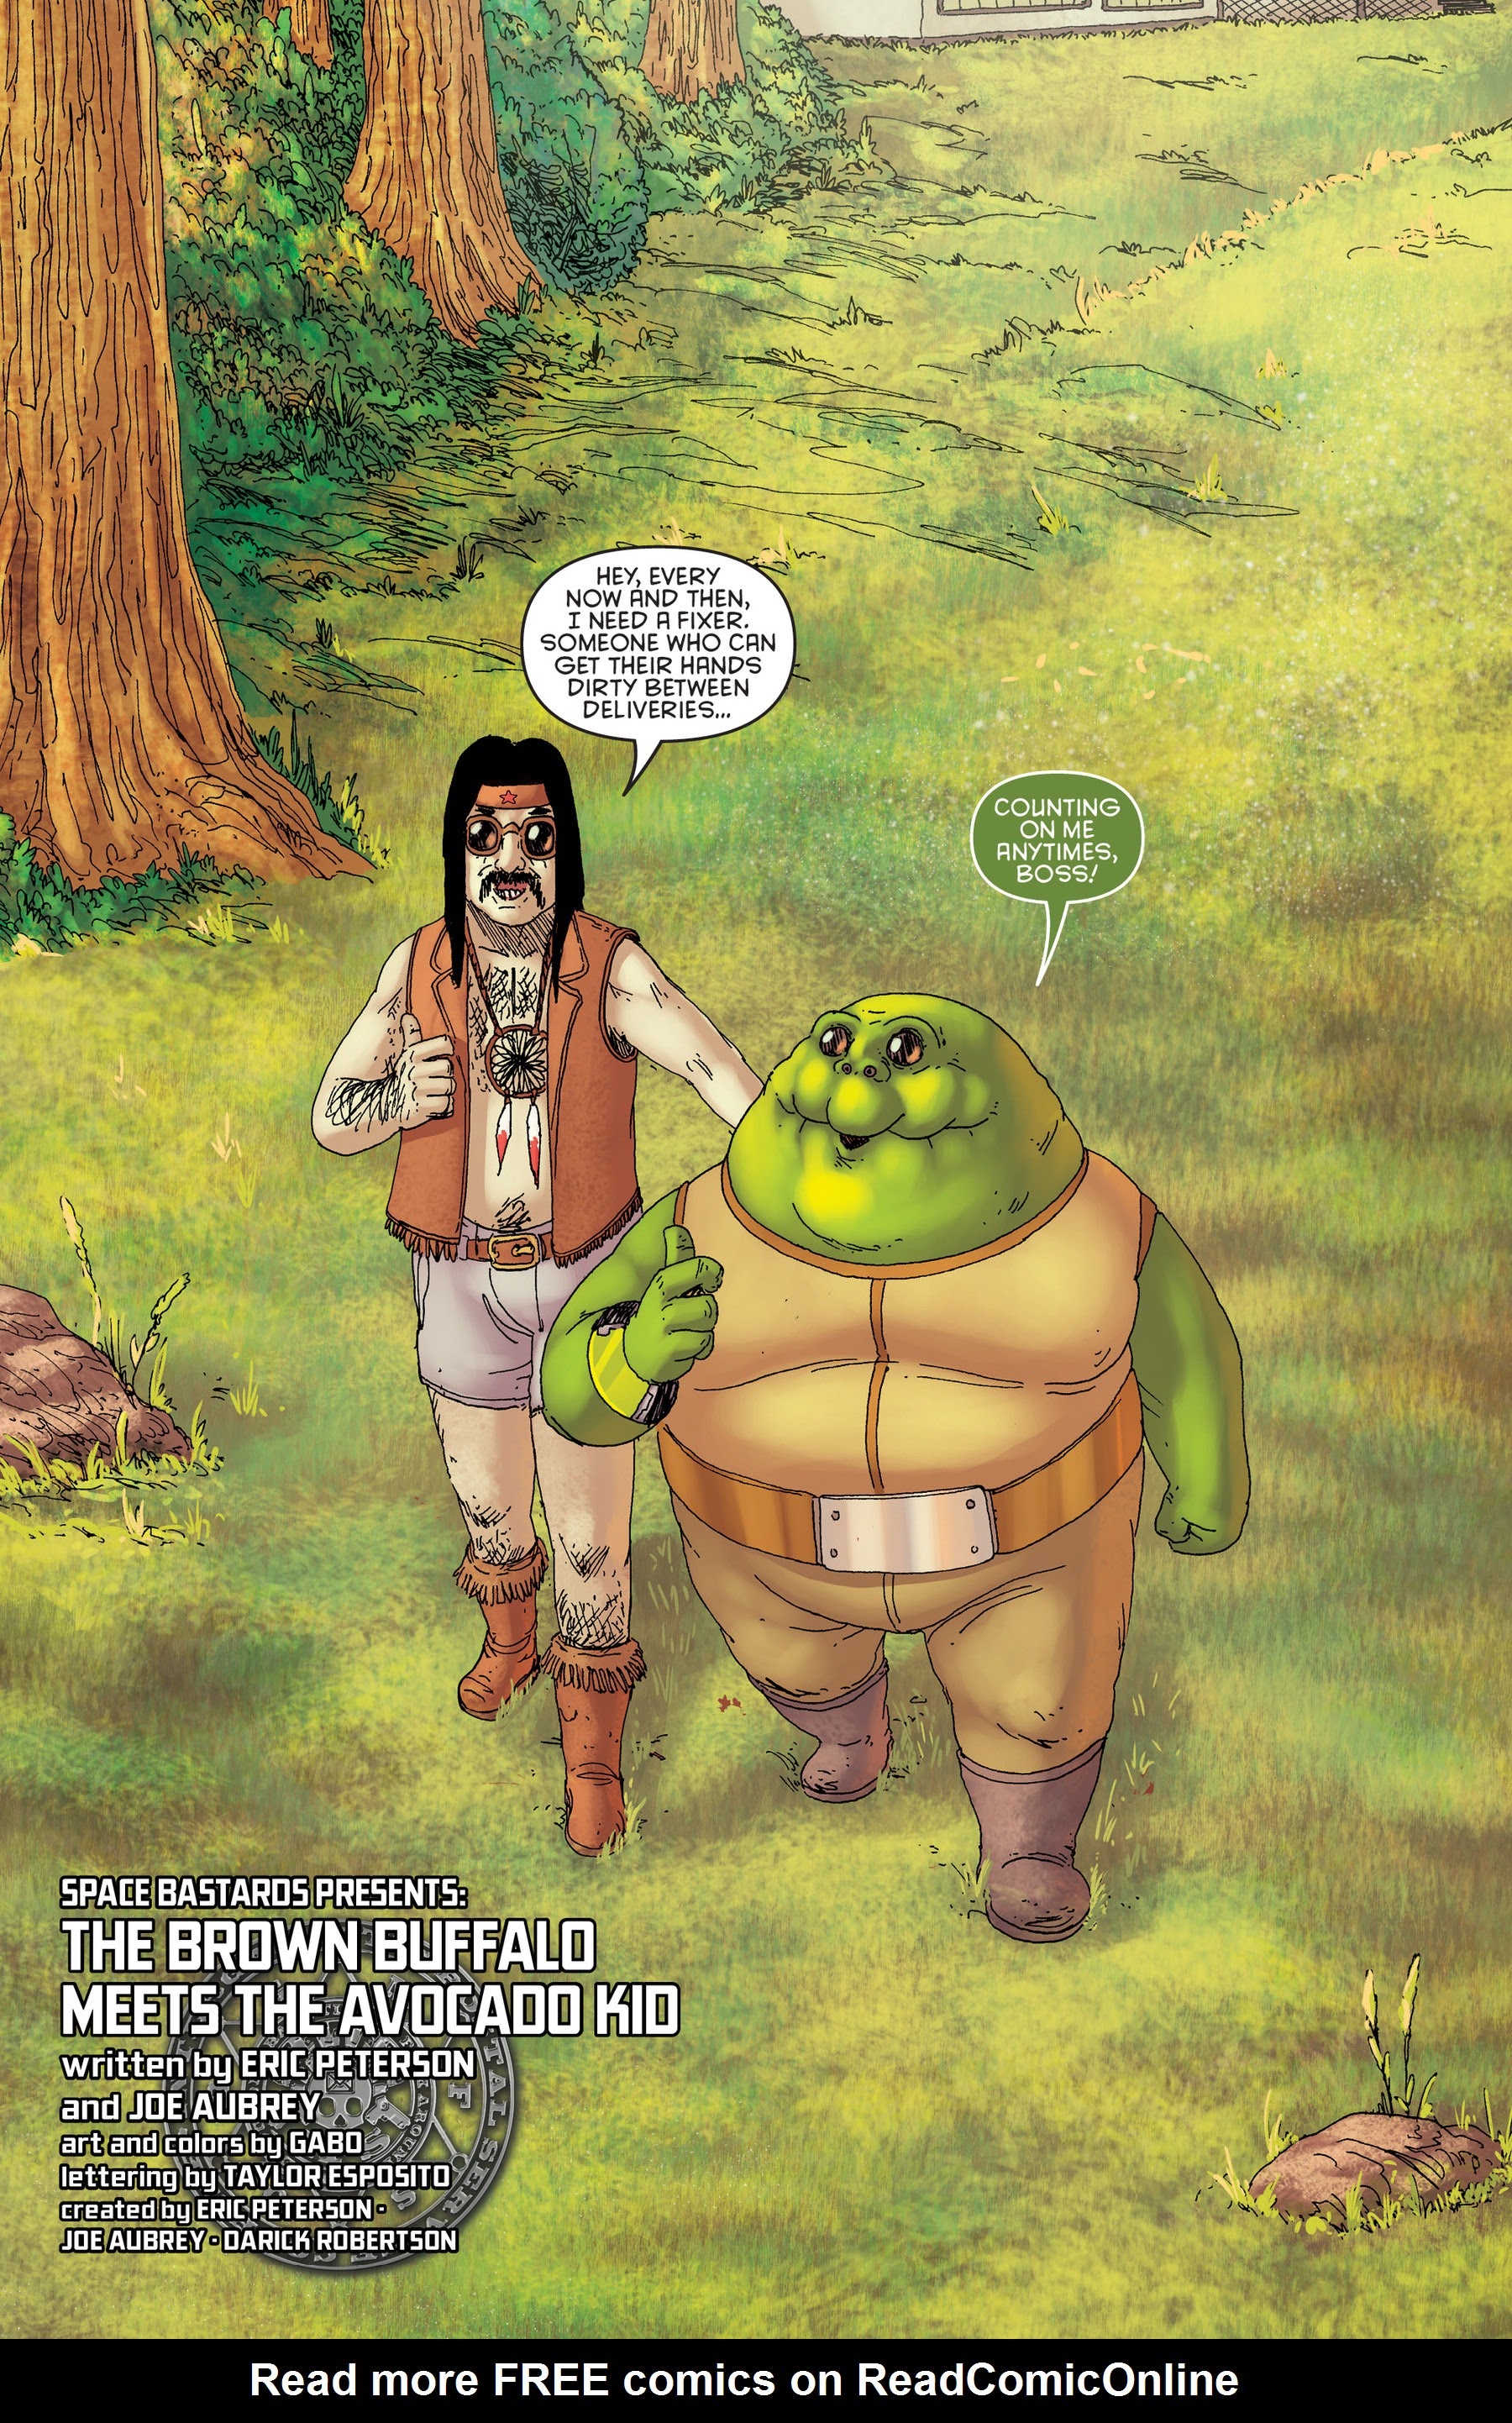 Read online Space Bastards: Special Delivery comic -  Issue # TPB - 37